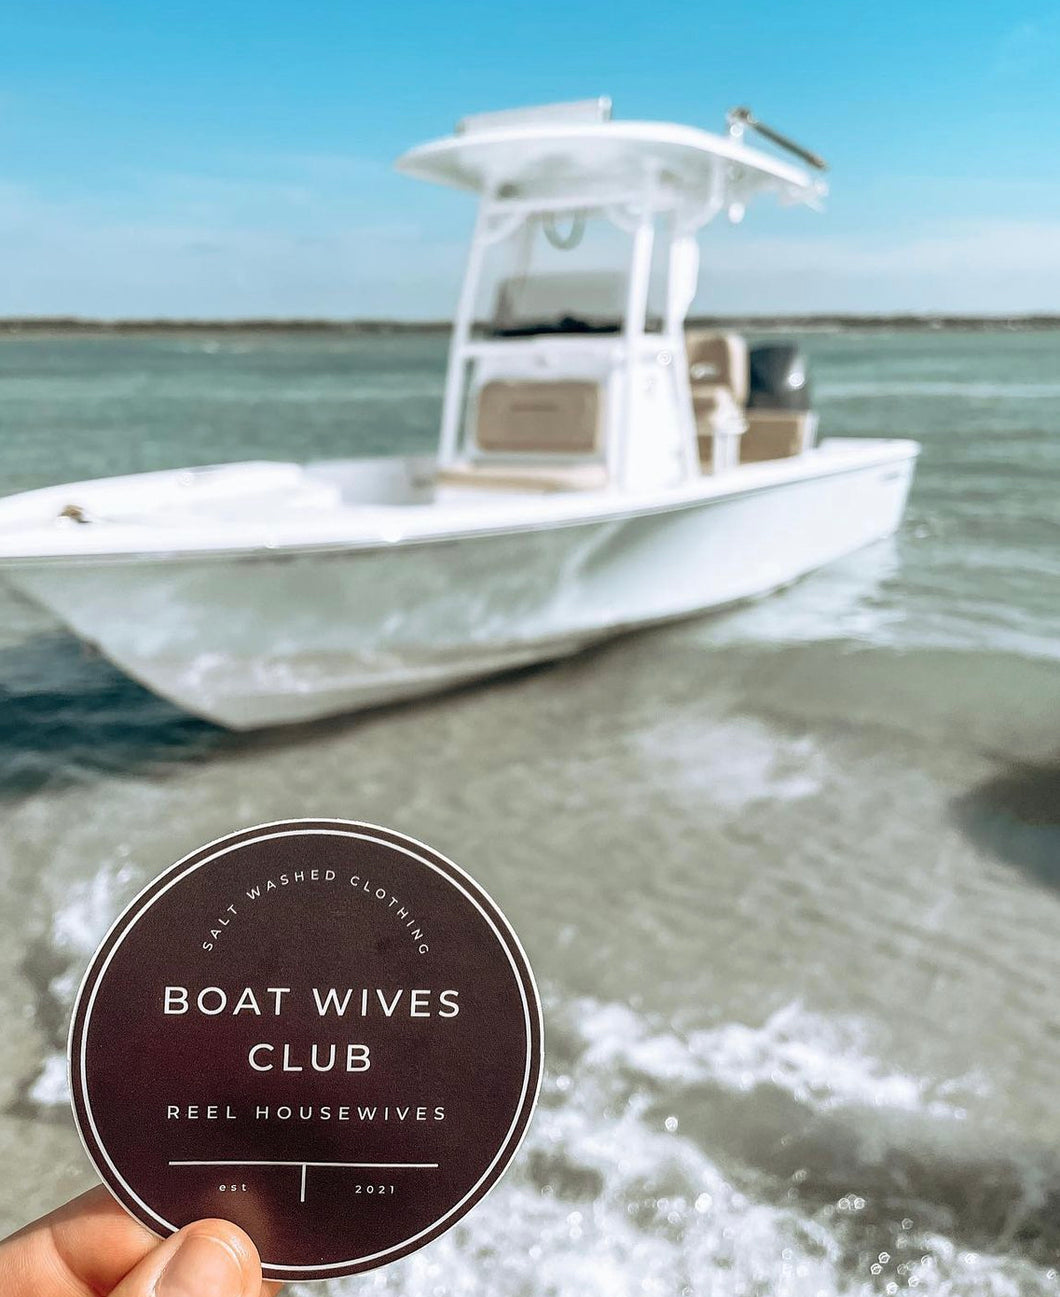 Boat Wives Club Decal